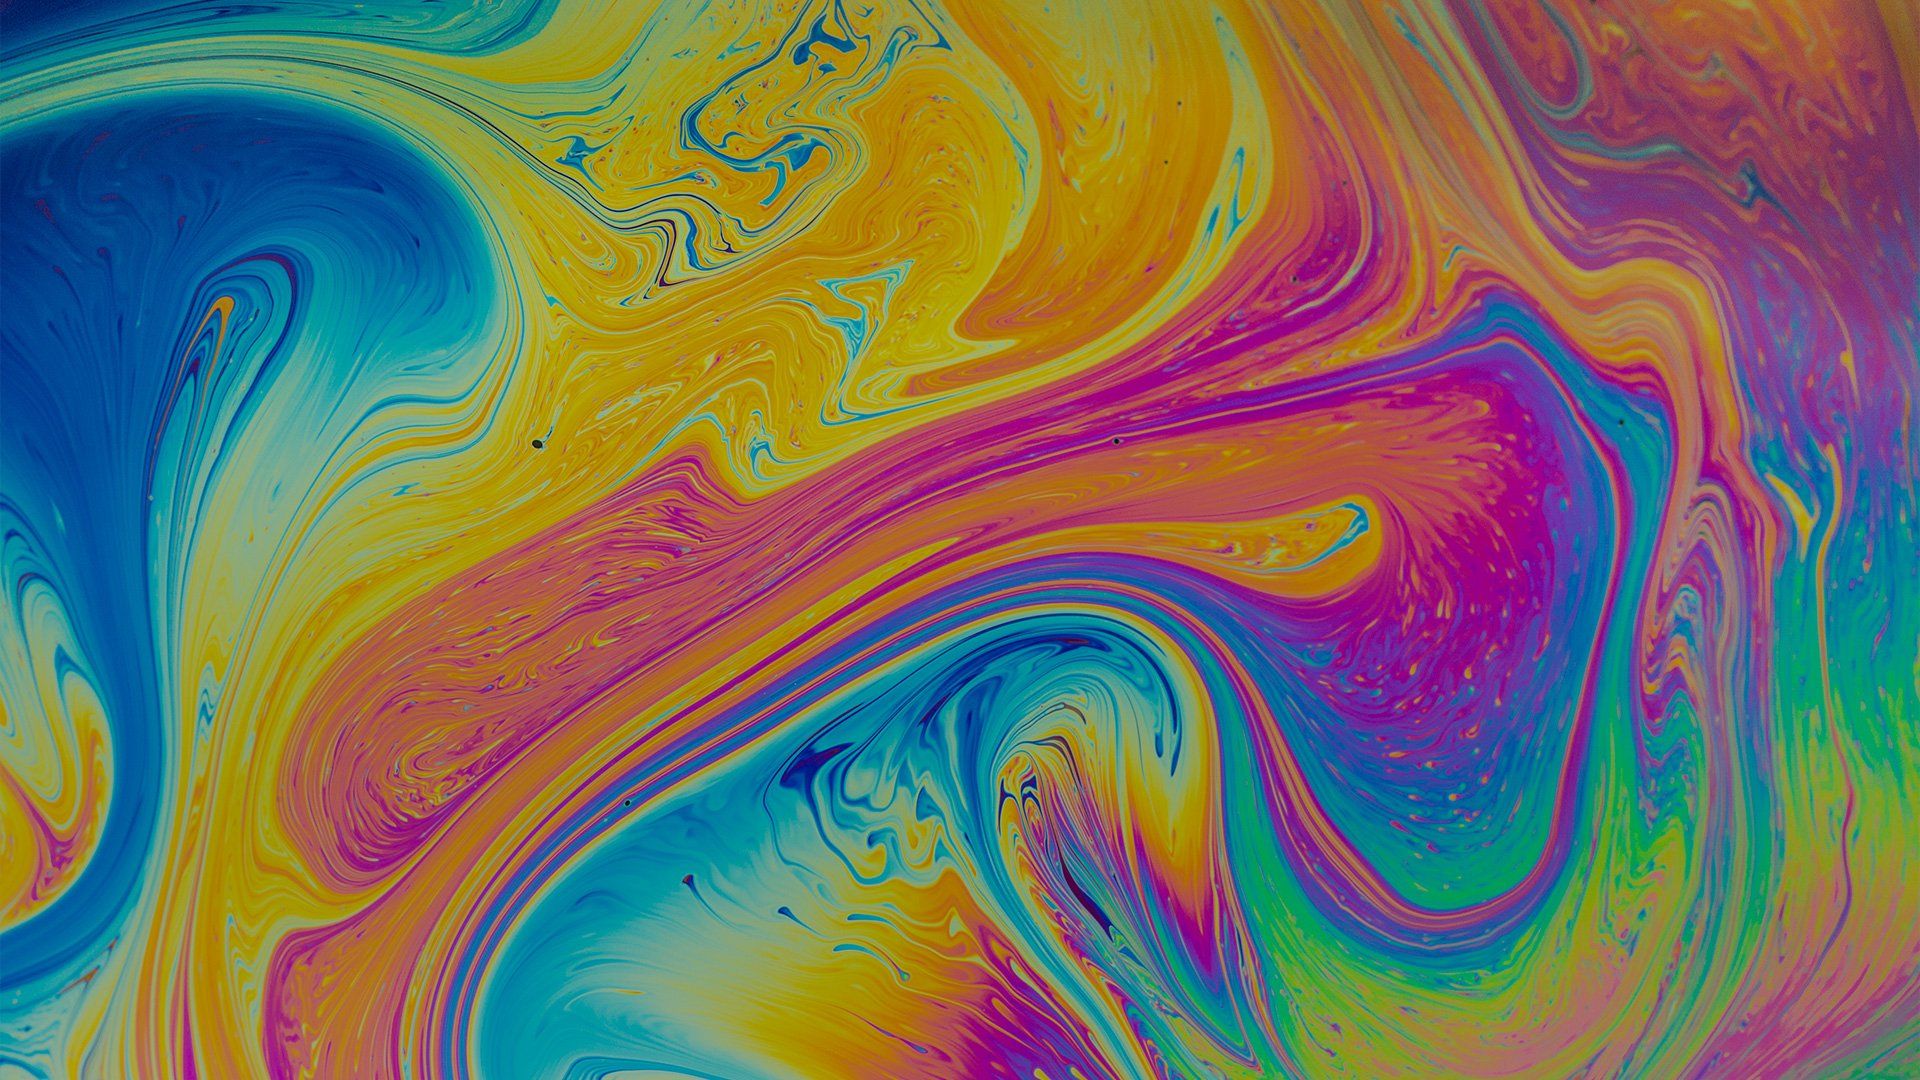 Get-inspired-abstract-macro-soap-bubbles-1-1920x1080-tint.jpeg